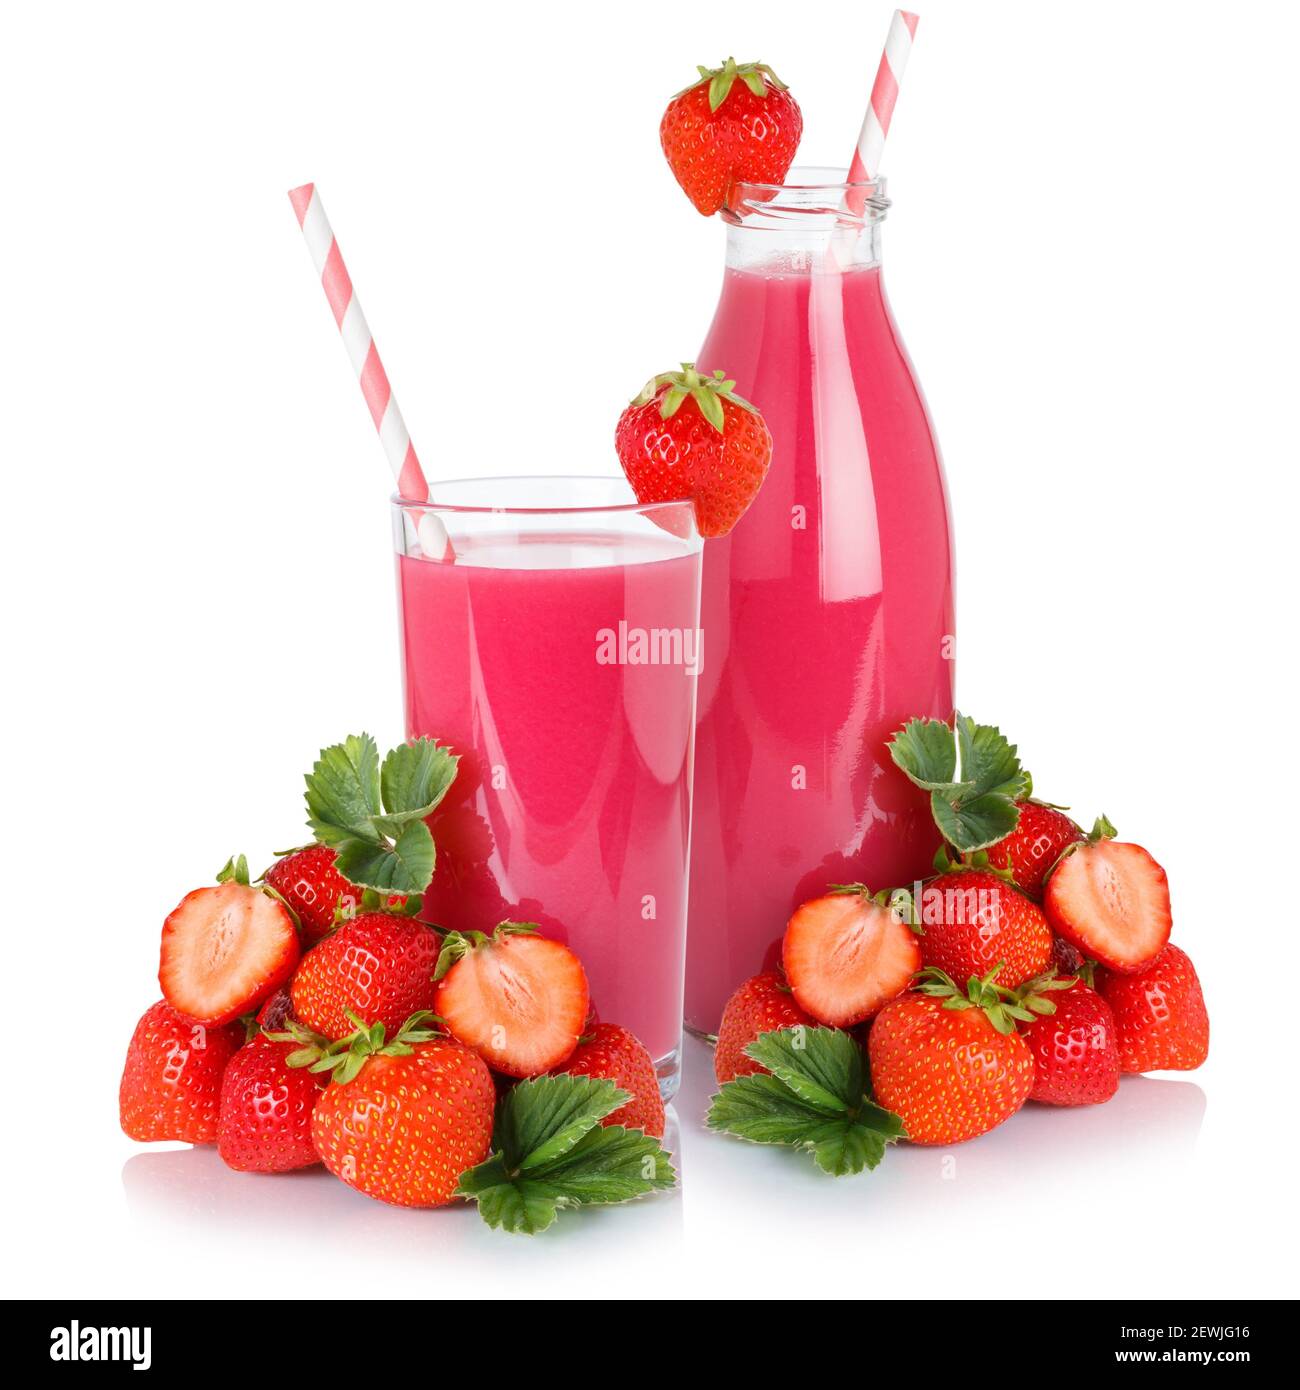 Fruit juice drink strawberry smoothie straw strawberries glass bottle isolated on a white background. Stock Photo